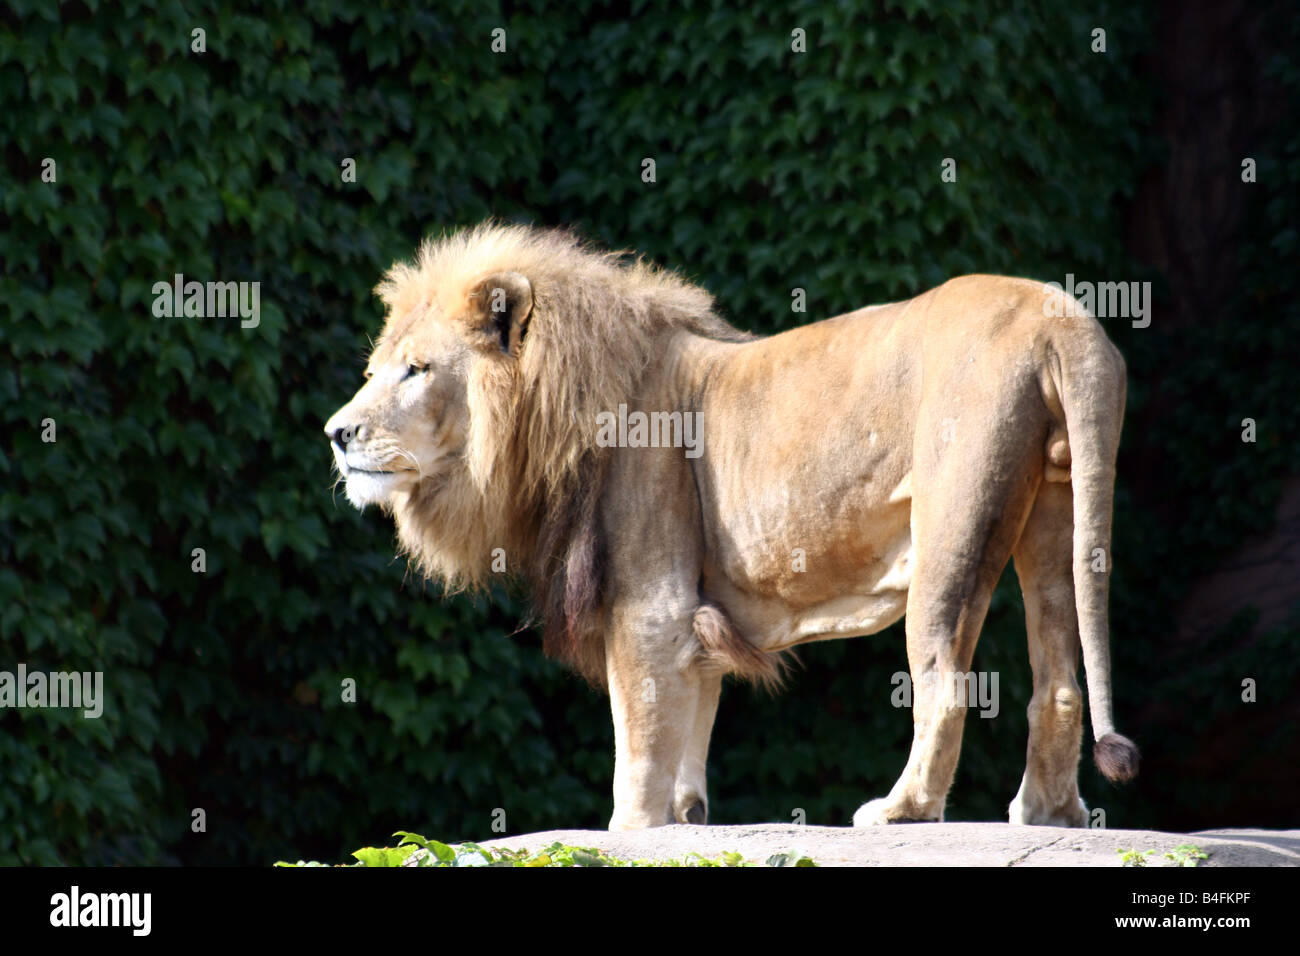 A Lion at Lincoln Park Zoo. Stock Photo